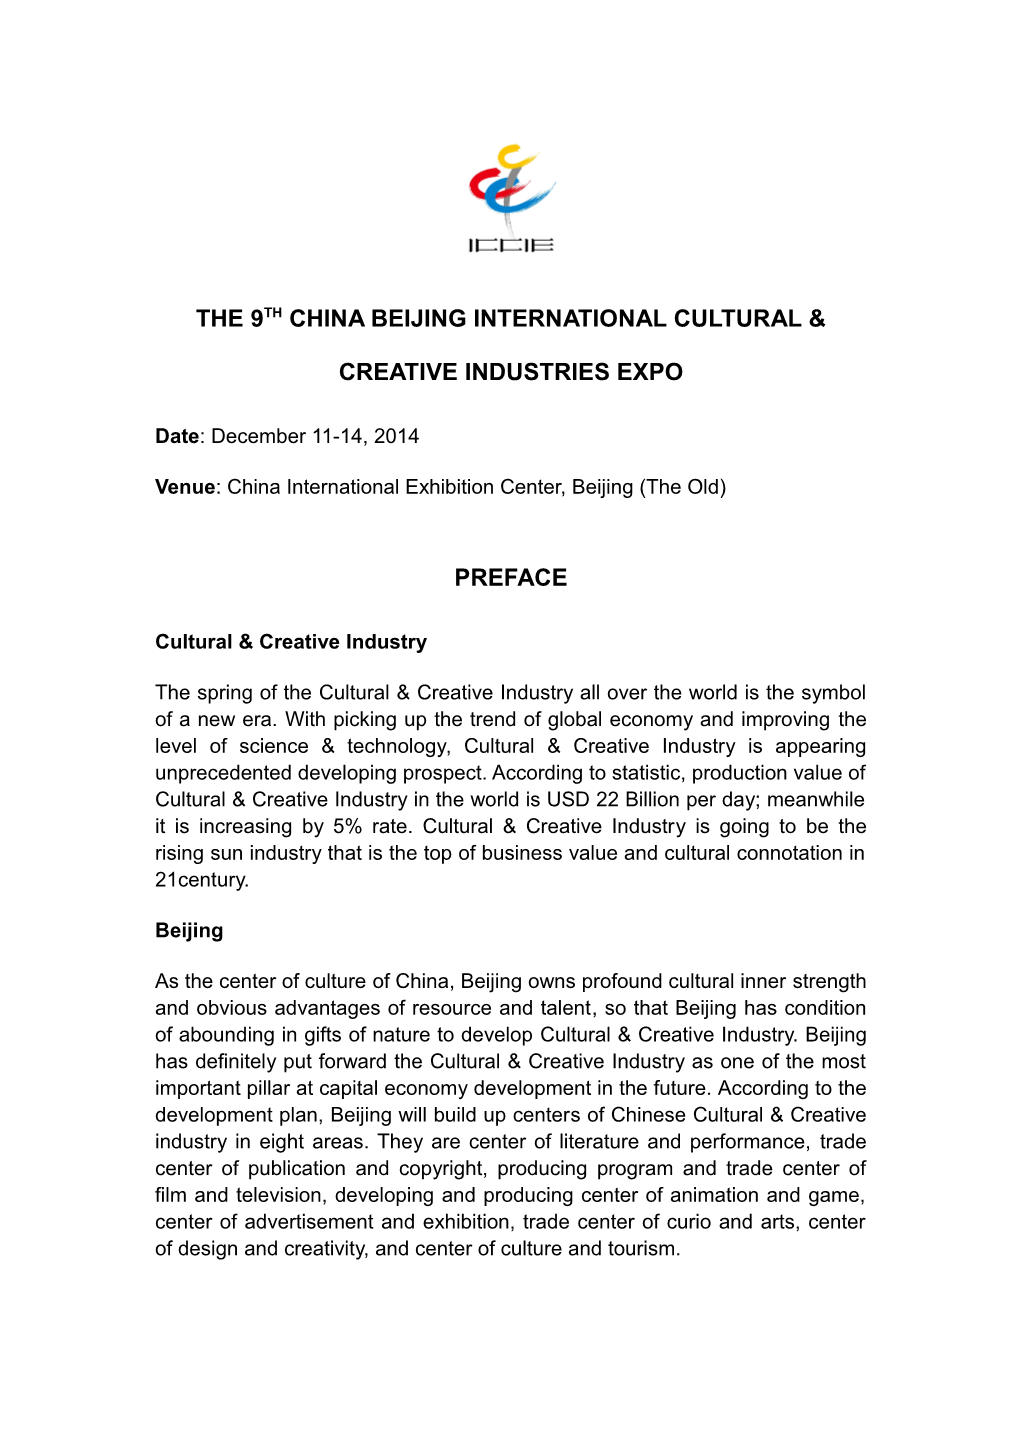 The Second China Beijing International Cultural & Creative Industries Expo